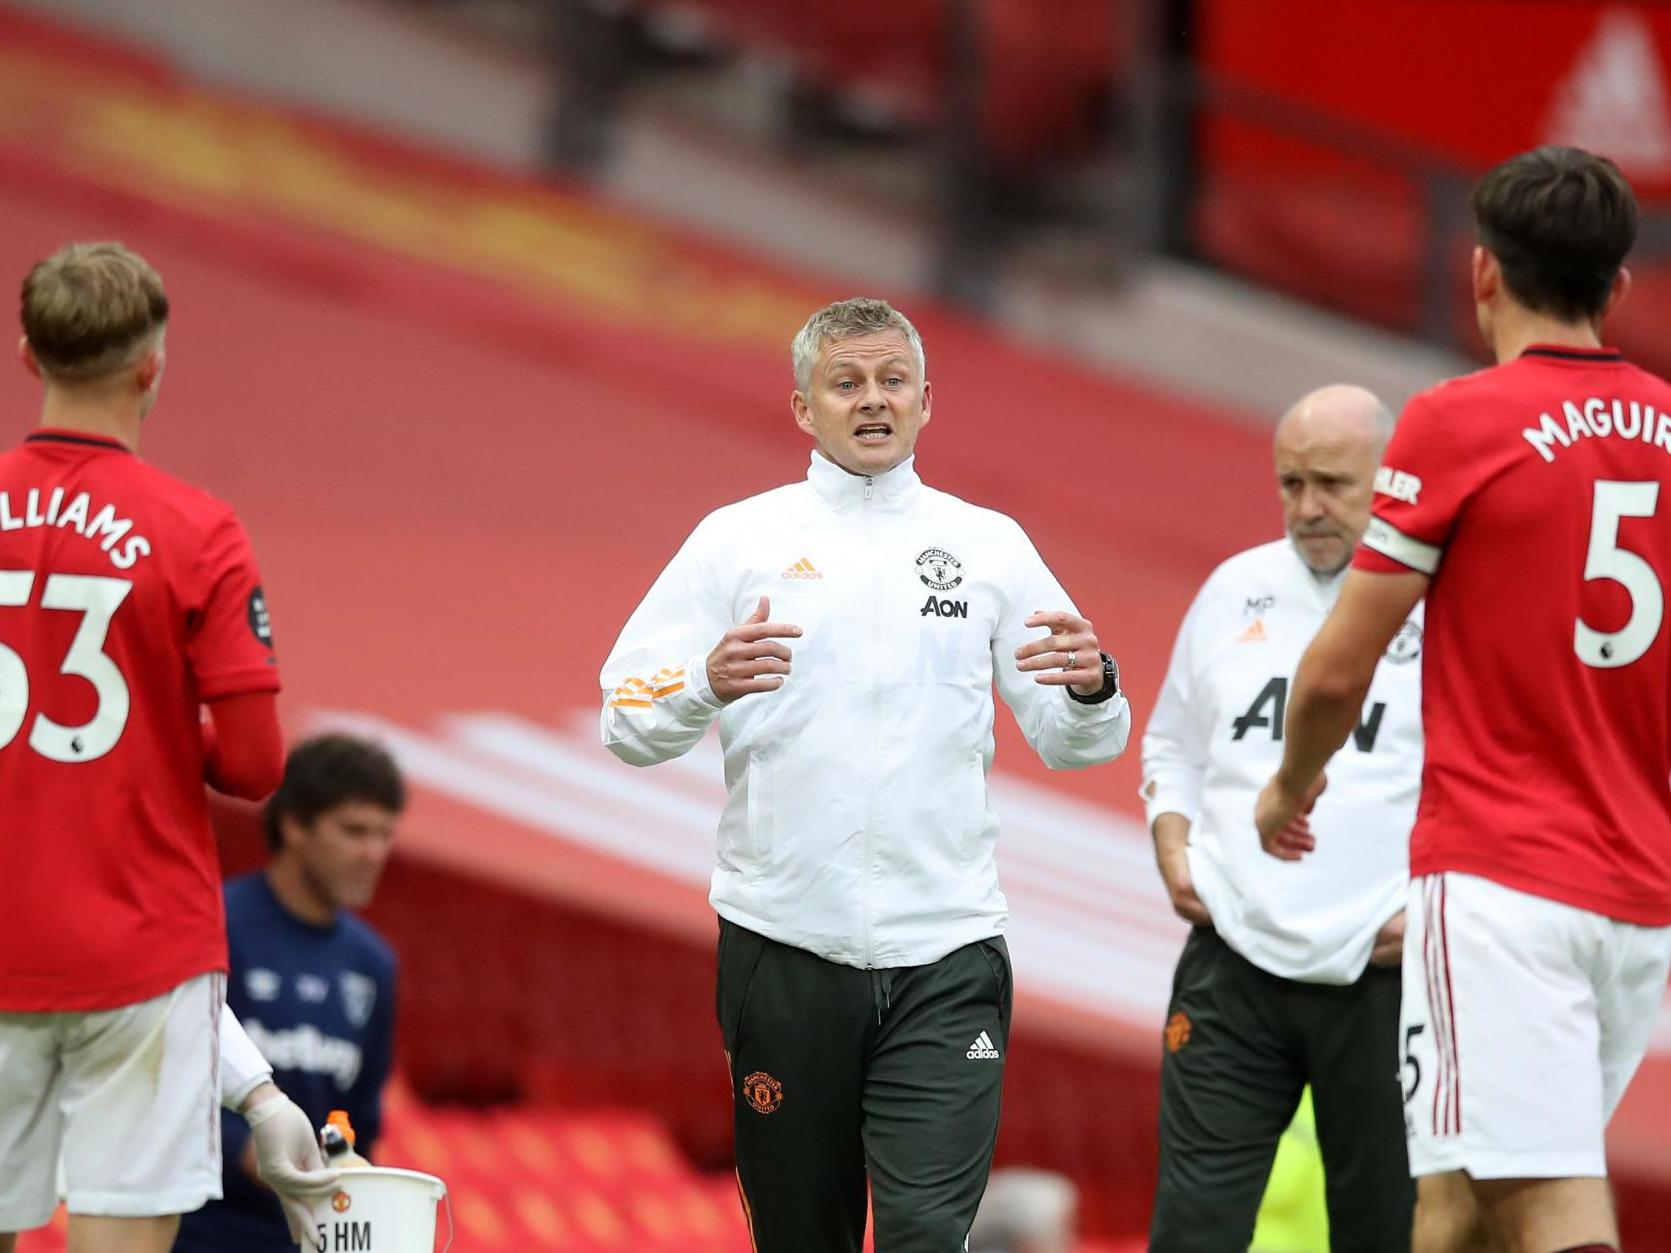 Manchester United: Ole Gunnar Solskjaer 'delighted' with chance to secure top-four place